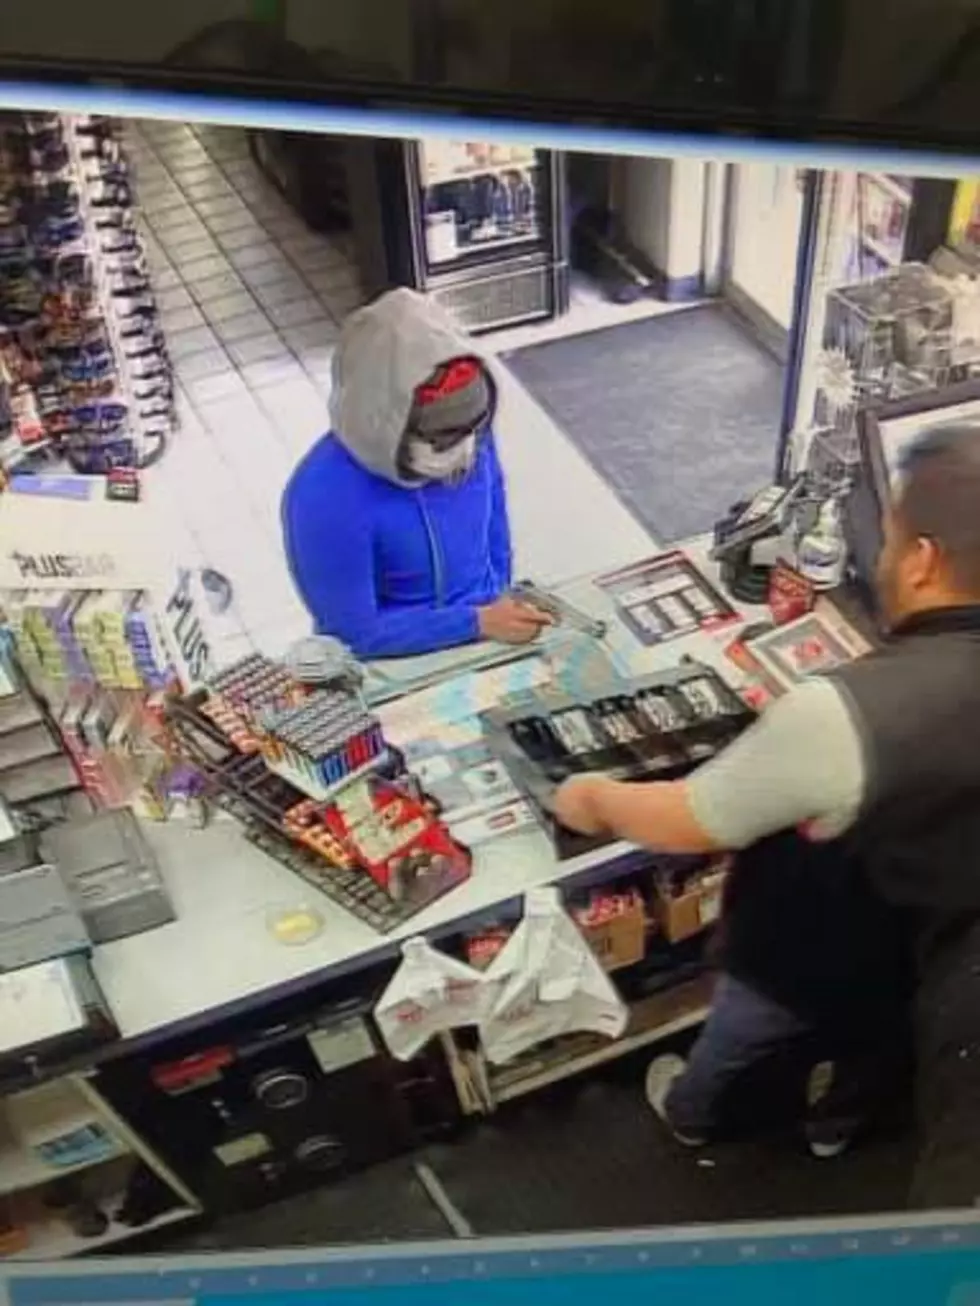 Moses Lake Police Looking for Help Identifying Armed Robbery Suspect